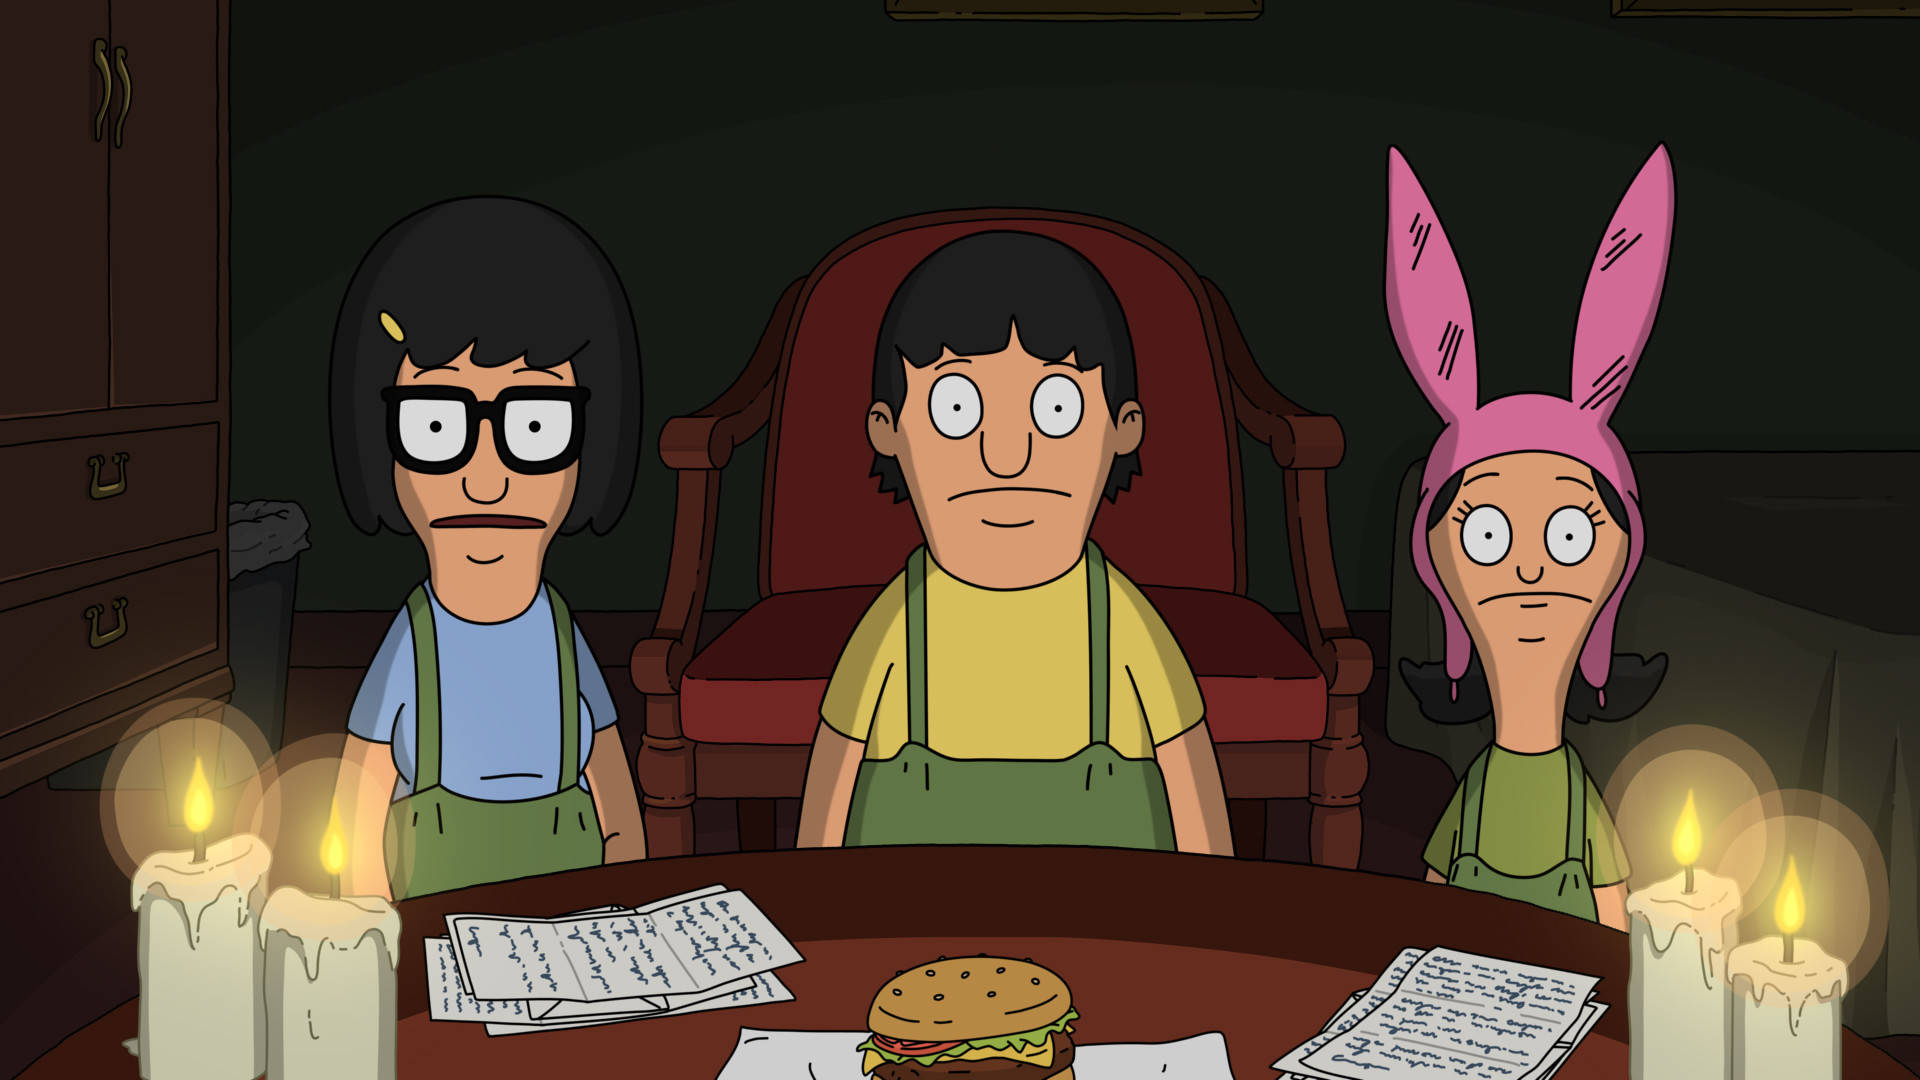 The Belcher children: Tina, Gene, and Louise holding candles. Wallpaper